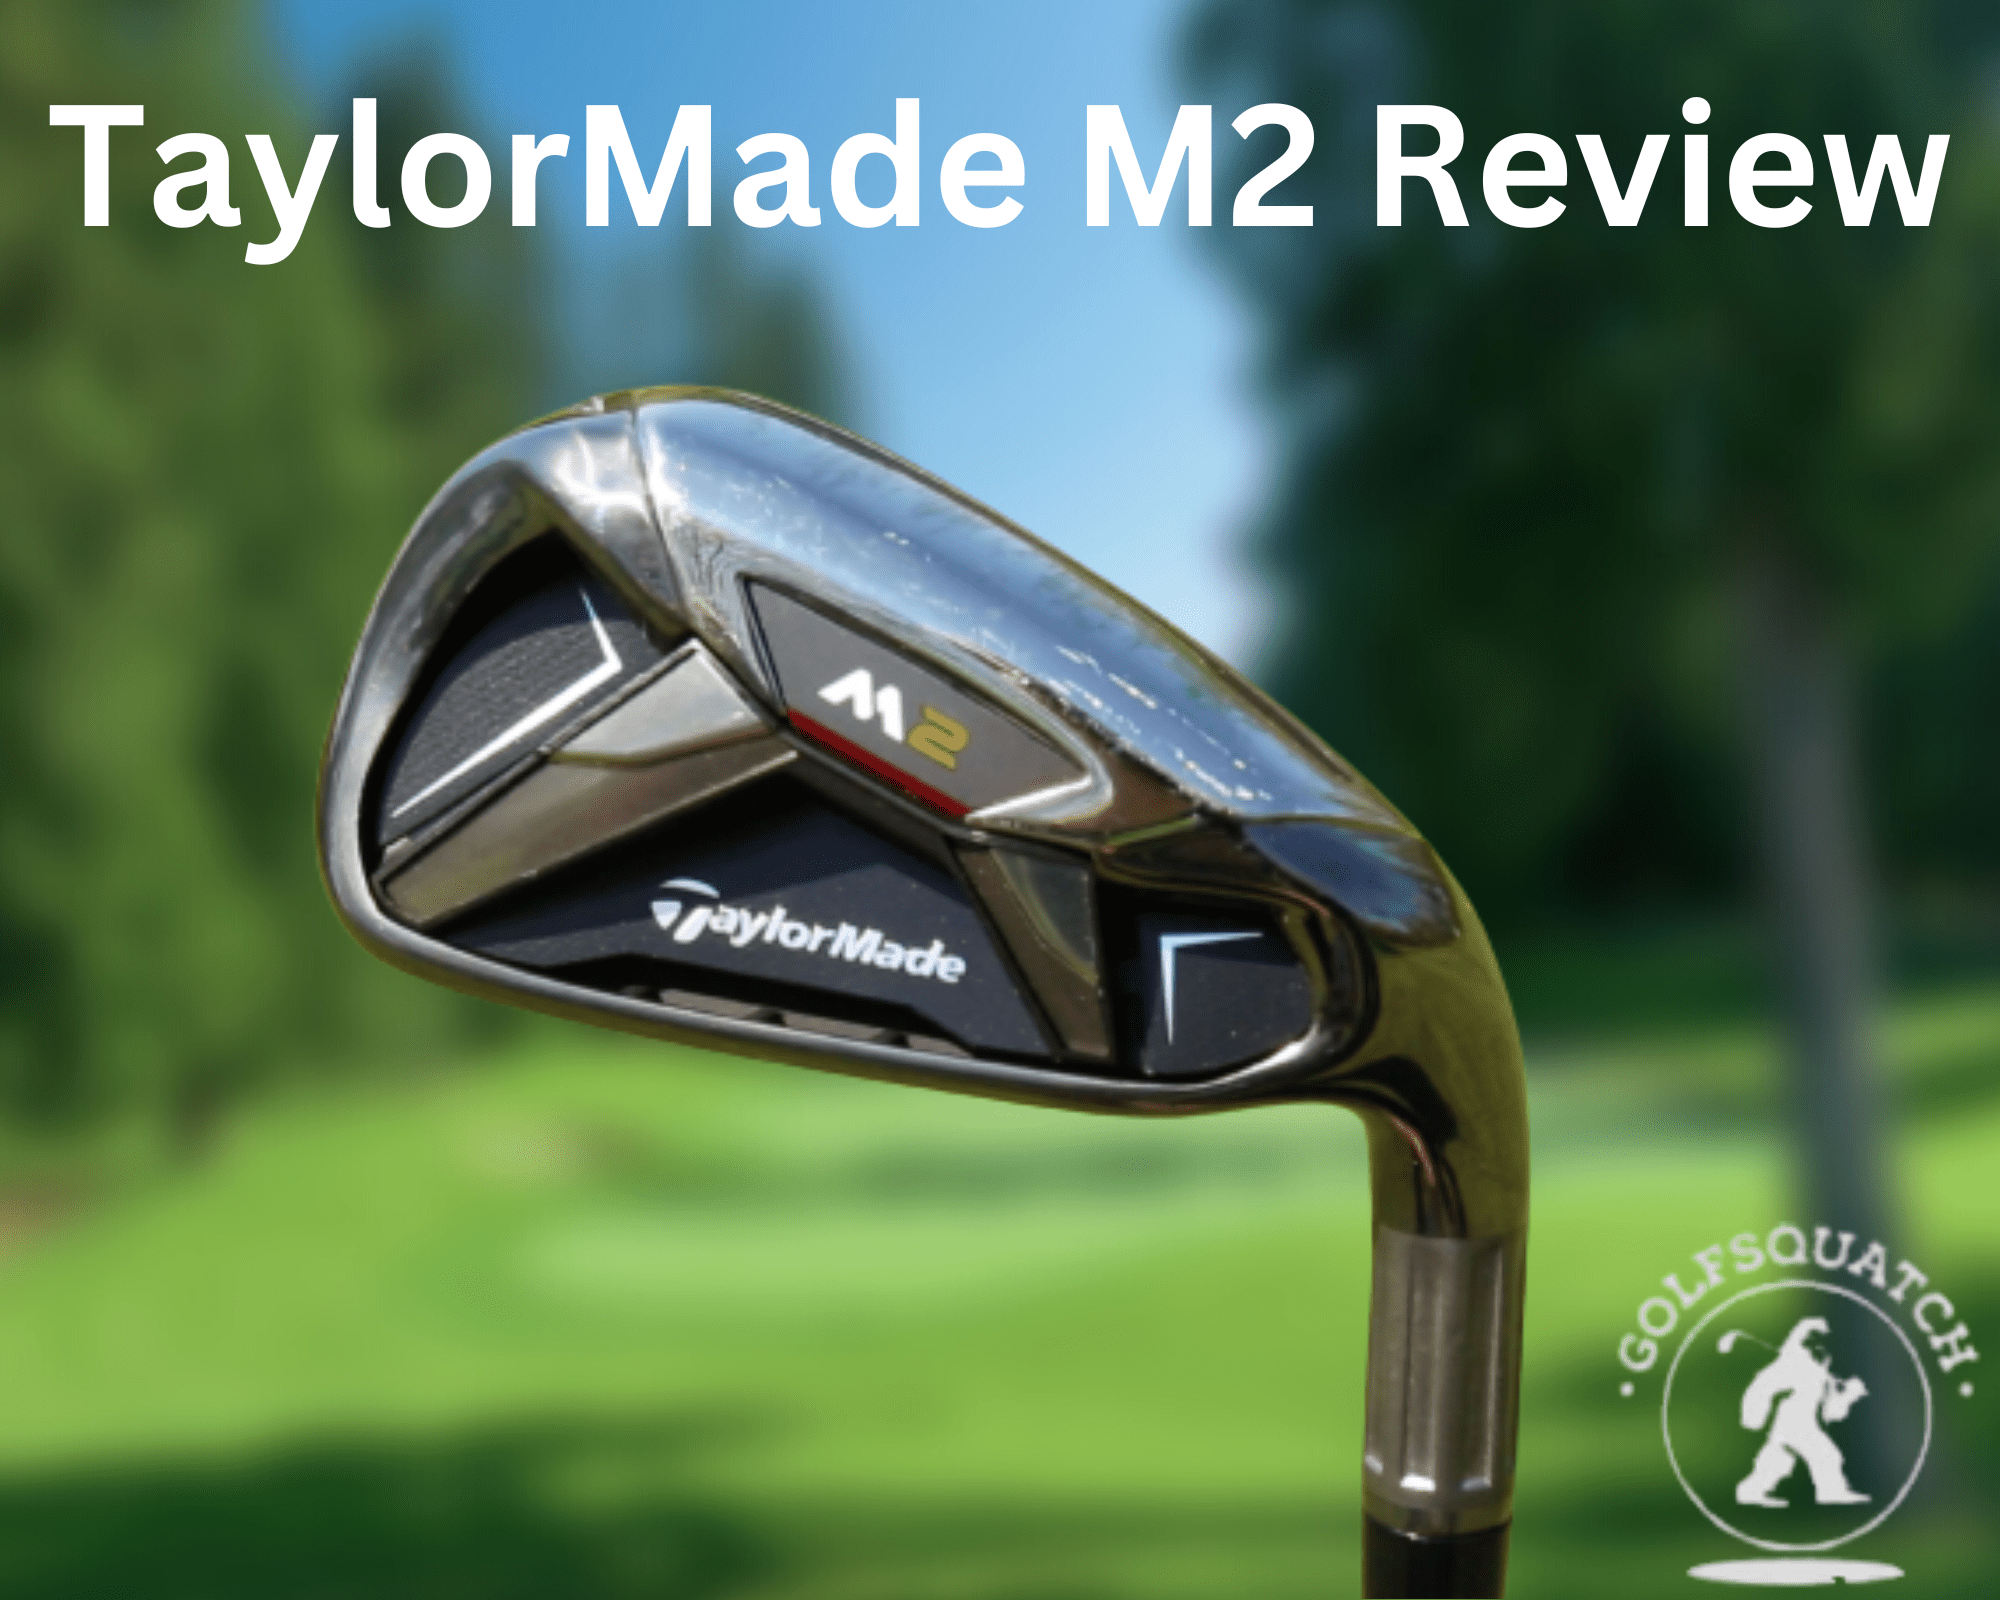 TaylorMade M2 Irons review